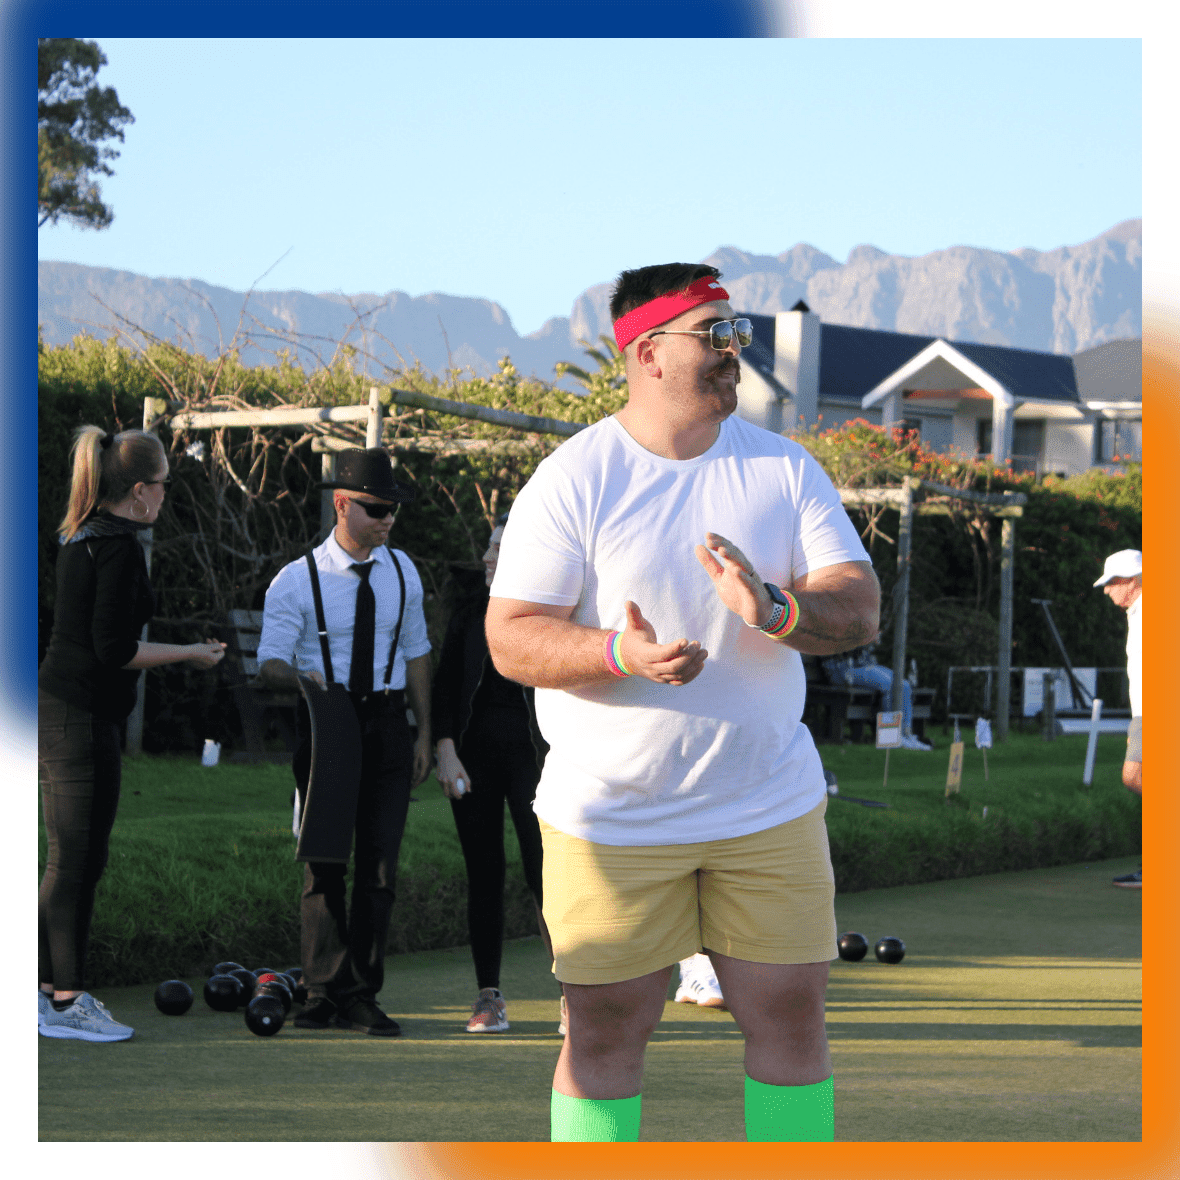 DSL Telecom team member showing team spirit through supporting team members during lawn bowls activity.